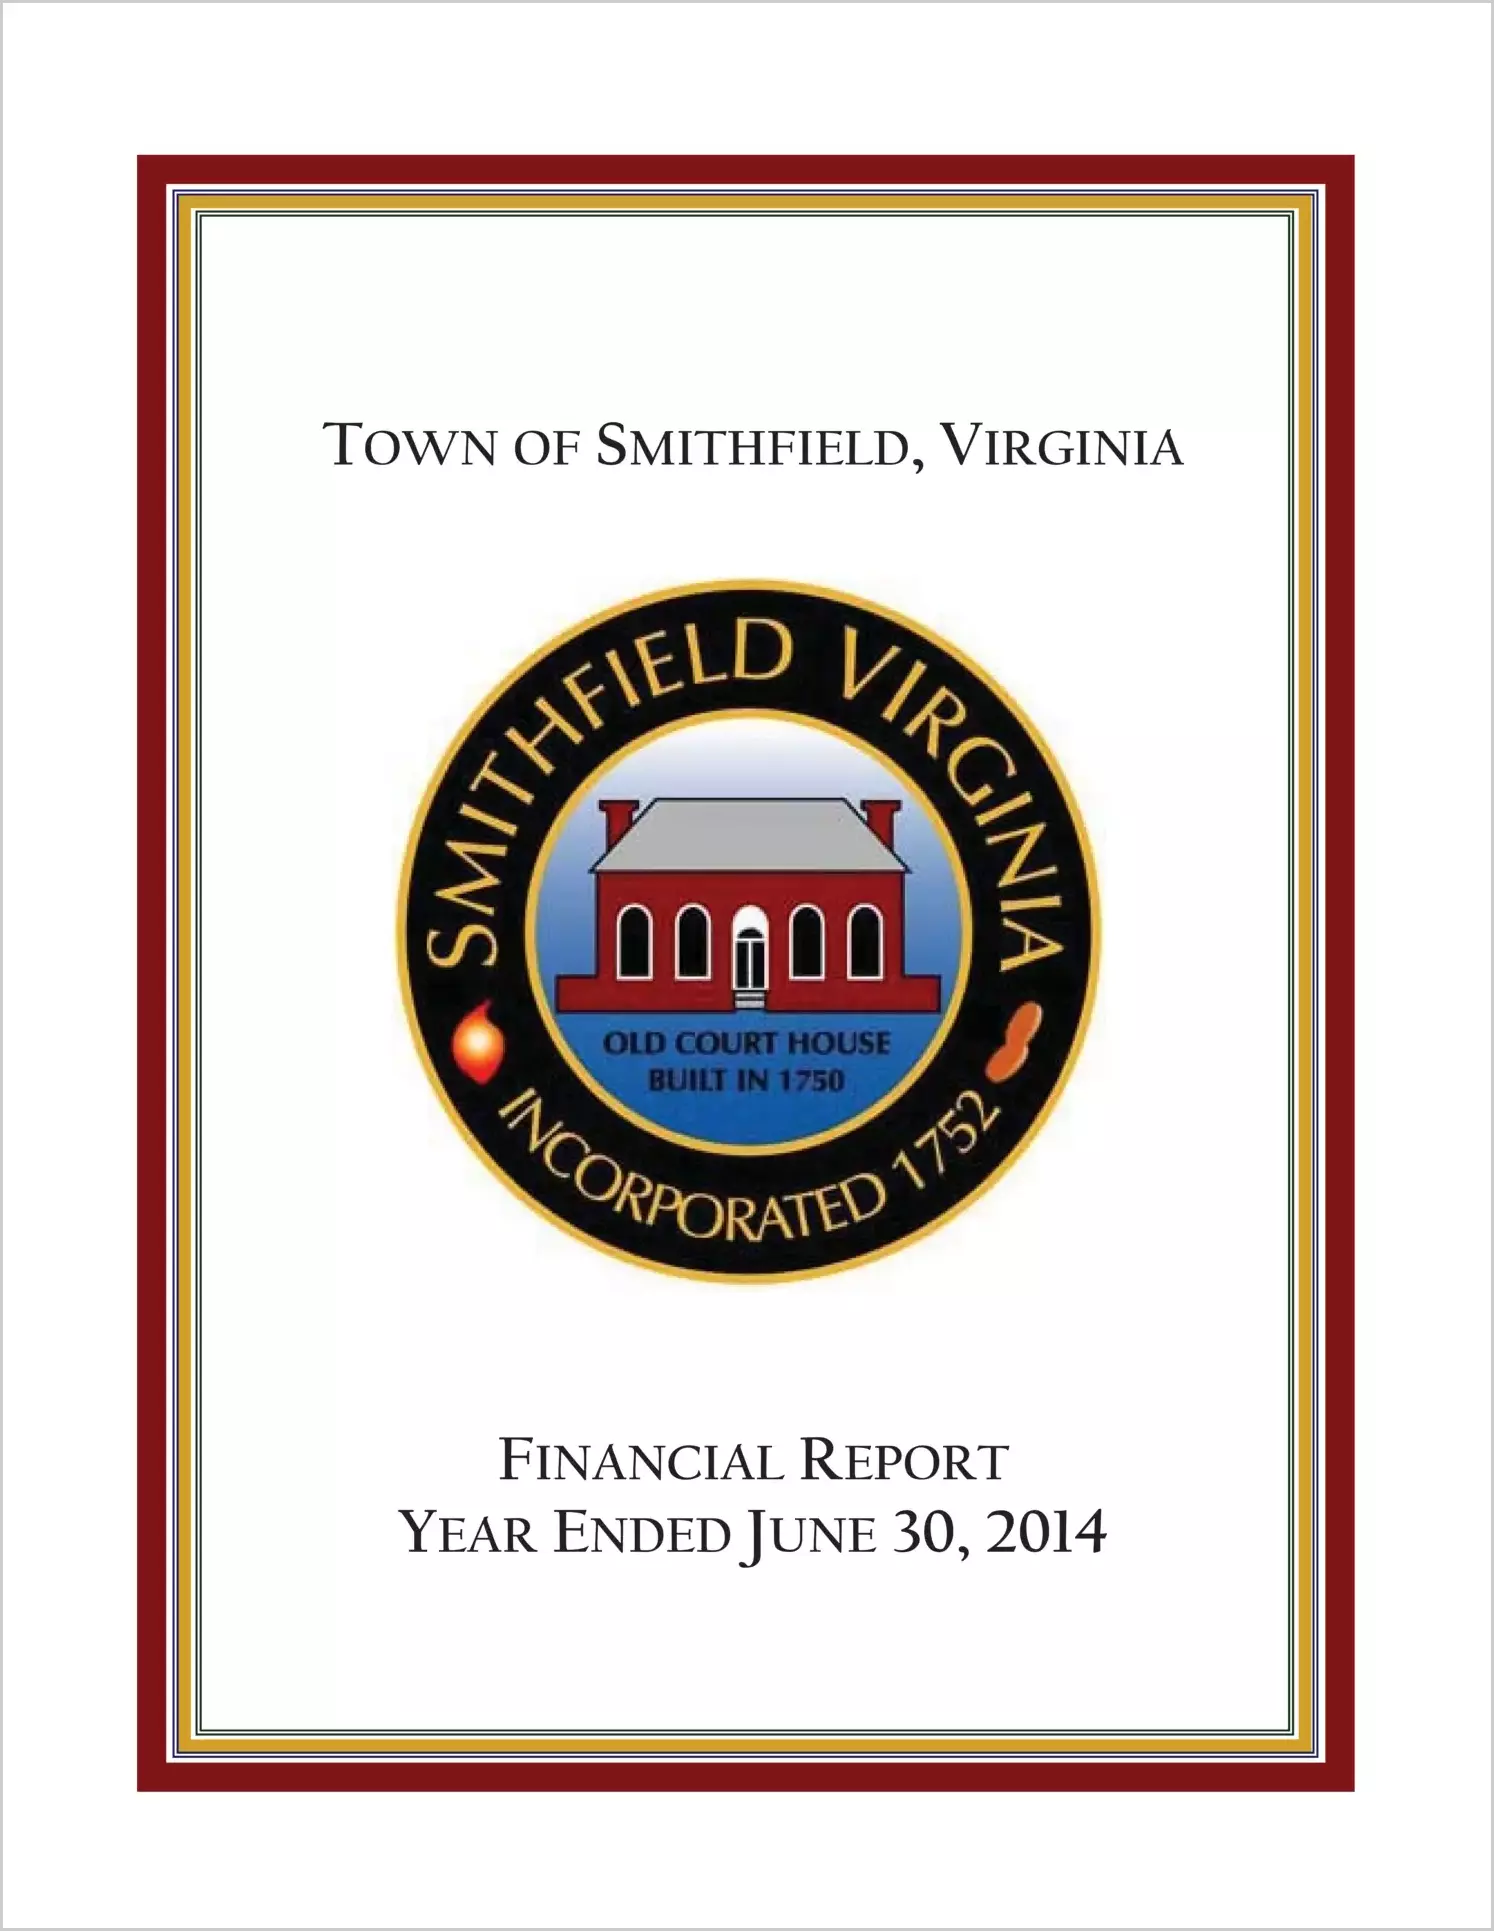 2014 Annual Financial Report for Town of Smithfield